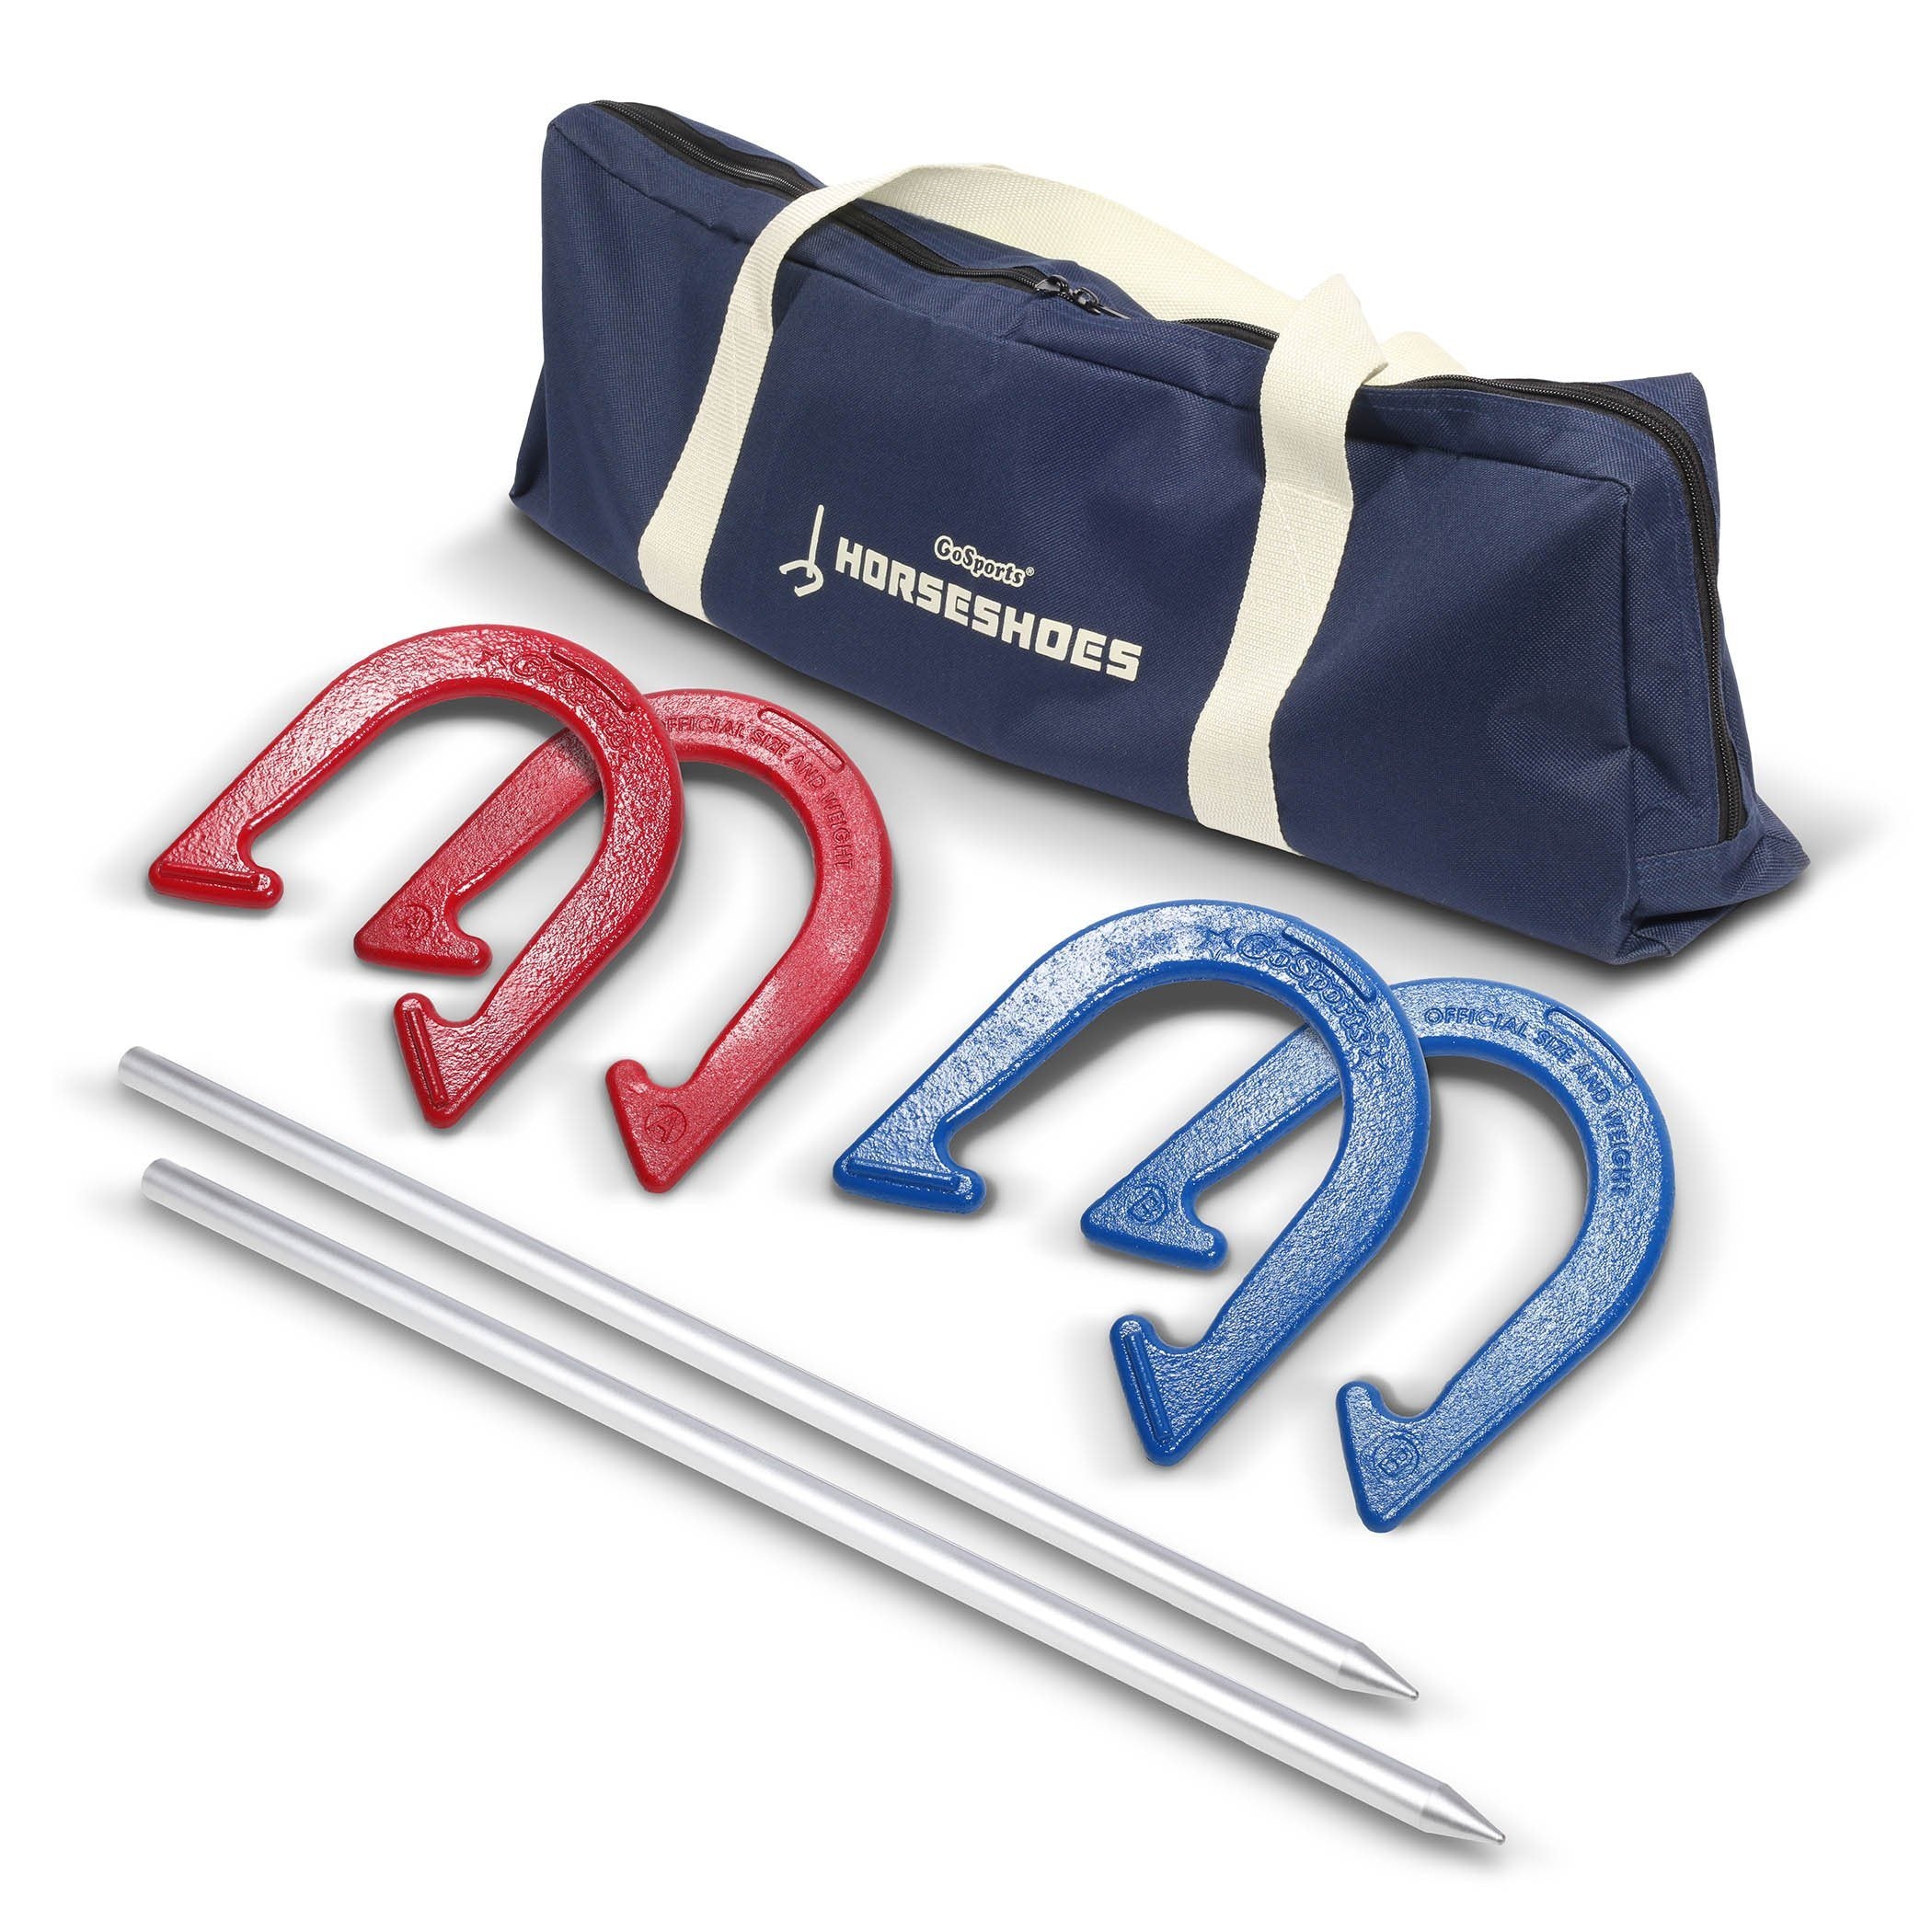  SpeedArmis Horseshoes Set, Universal Size Lawn Horseshoes  Outdoor Games for Parties Beach Backyard - Includes 4 Horseshoes & 2 Steel  Stakes & Durable Carrying Bag (Blue & Red) : Sports & Outdoors